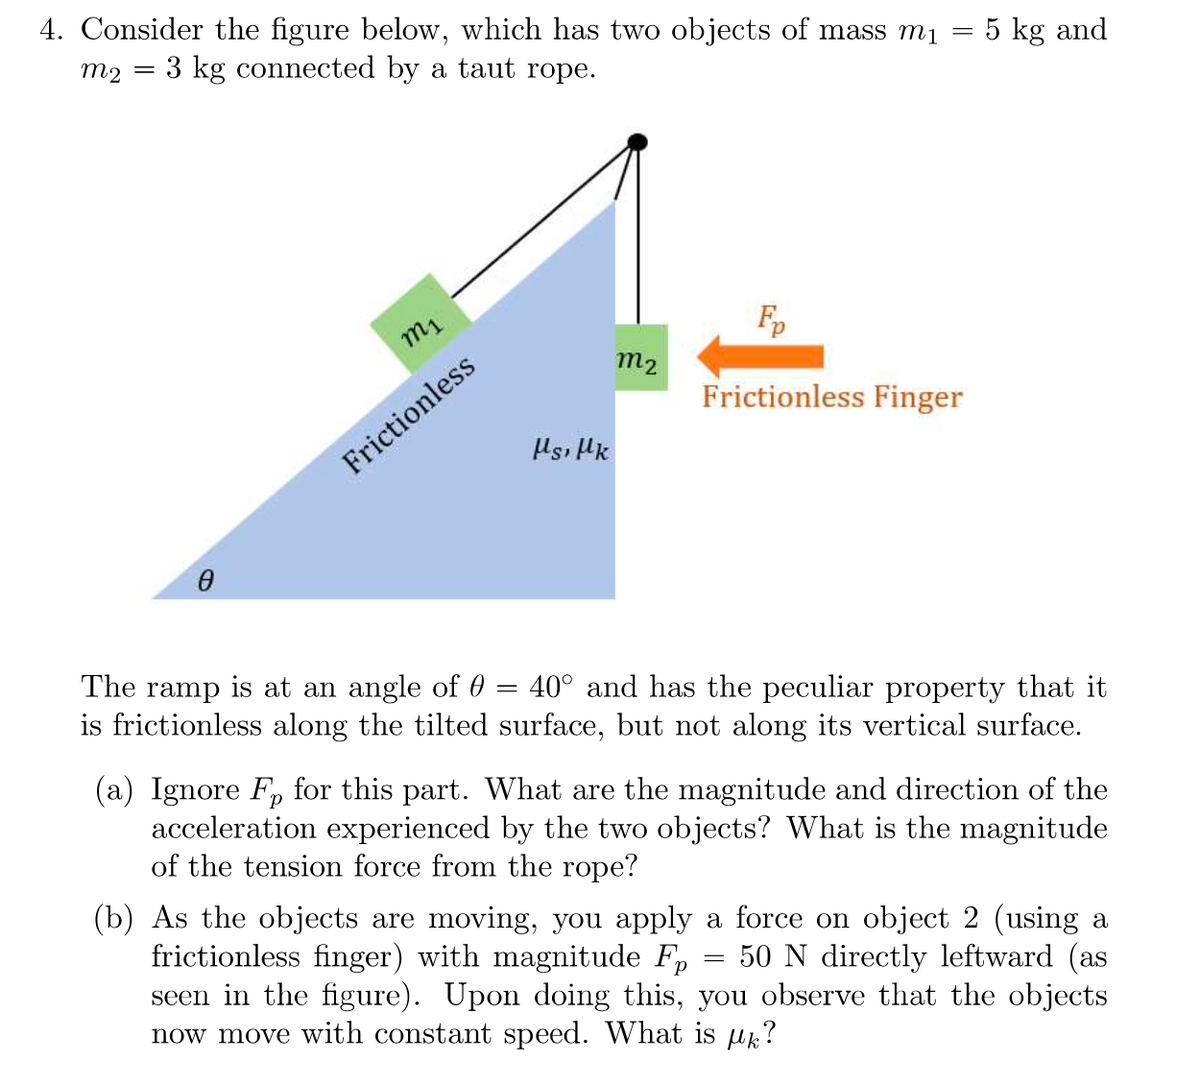 =
4. Consider the figure below, which has two objects of mass mi
3 kg connected by a taut rope.
m2
Fp
m2
Frictionless Finger
Ms, Mk
=
The ramp is at an angle of 0
40° and has the peculiar property that it
is frictionless along the tilted surface, but not along its vertical surface.
(a) Ignore Fp for this part. What are the magnitude and direction of the
acceleration experienced by the two objects? What is the magnitude
of the tension force from the rope?
(b) As the objects are moving, you apply a force on object 2 (using a
frictionless finger) with magnitude Fp 50 N directly leftward (as
seen in the figure). Upon doing this, you observe that the objects
now move with constant speed. What is ?
m₁
Frictionless
5 kg and